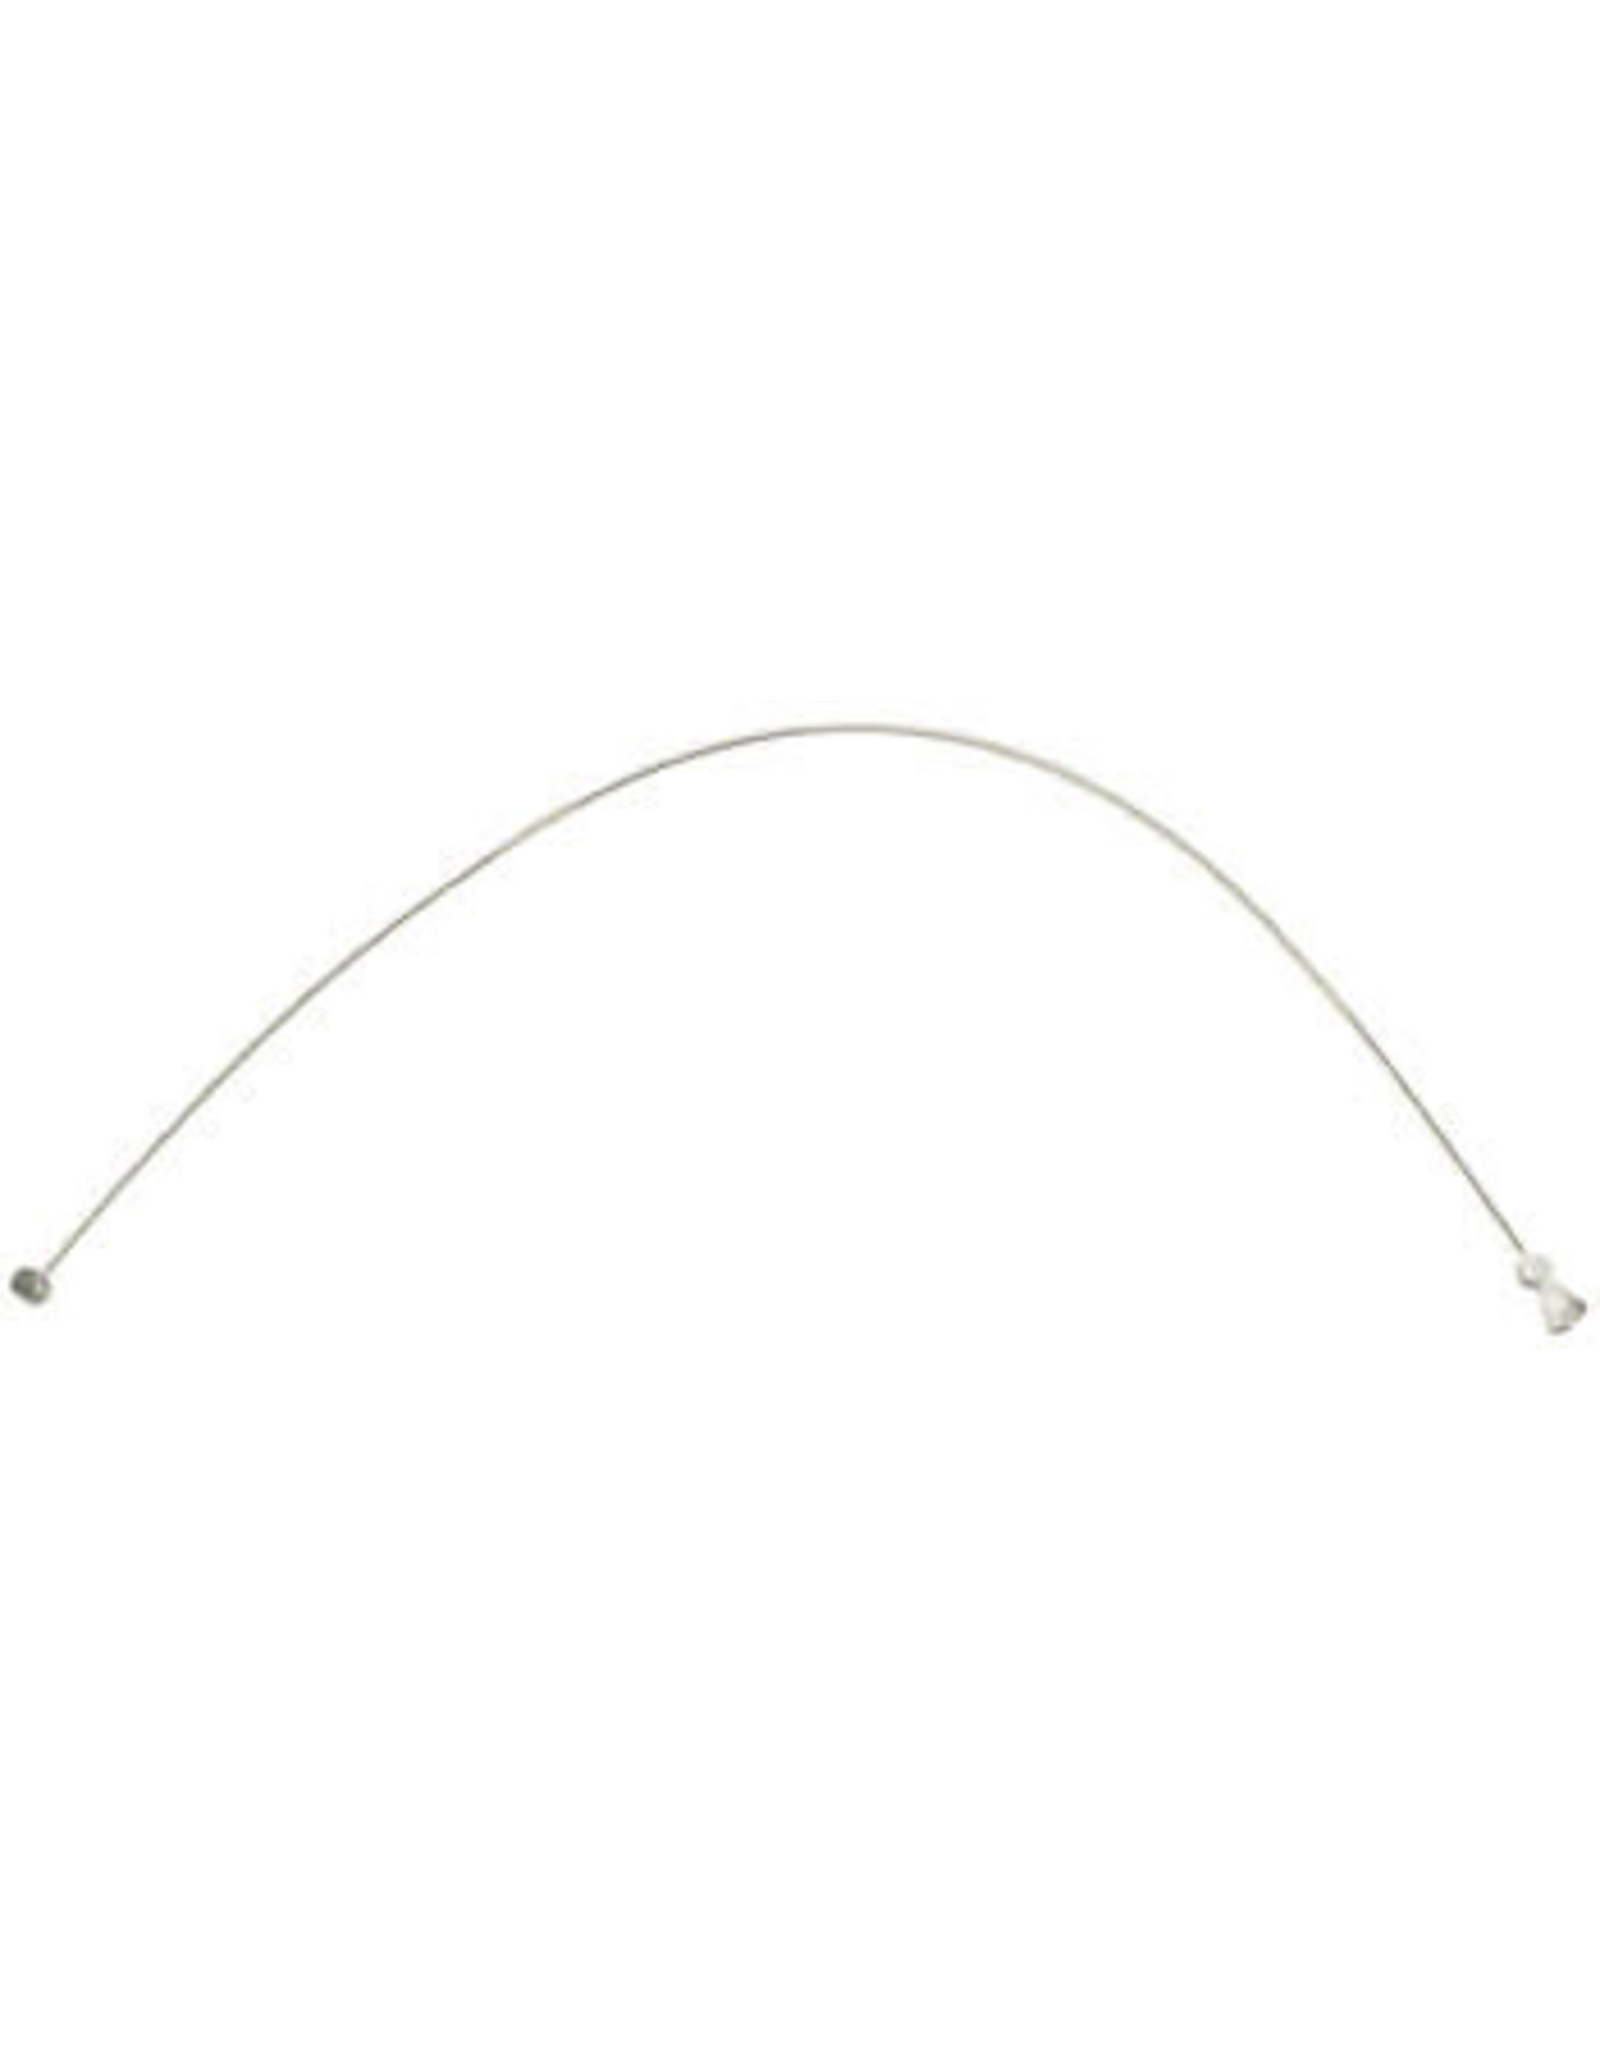 JAGWIRE Jagwire Double-Ended Straddle Wire 1.8mm x 380mm, Single